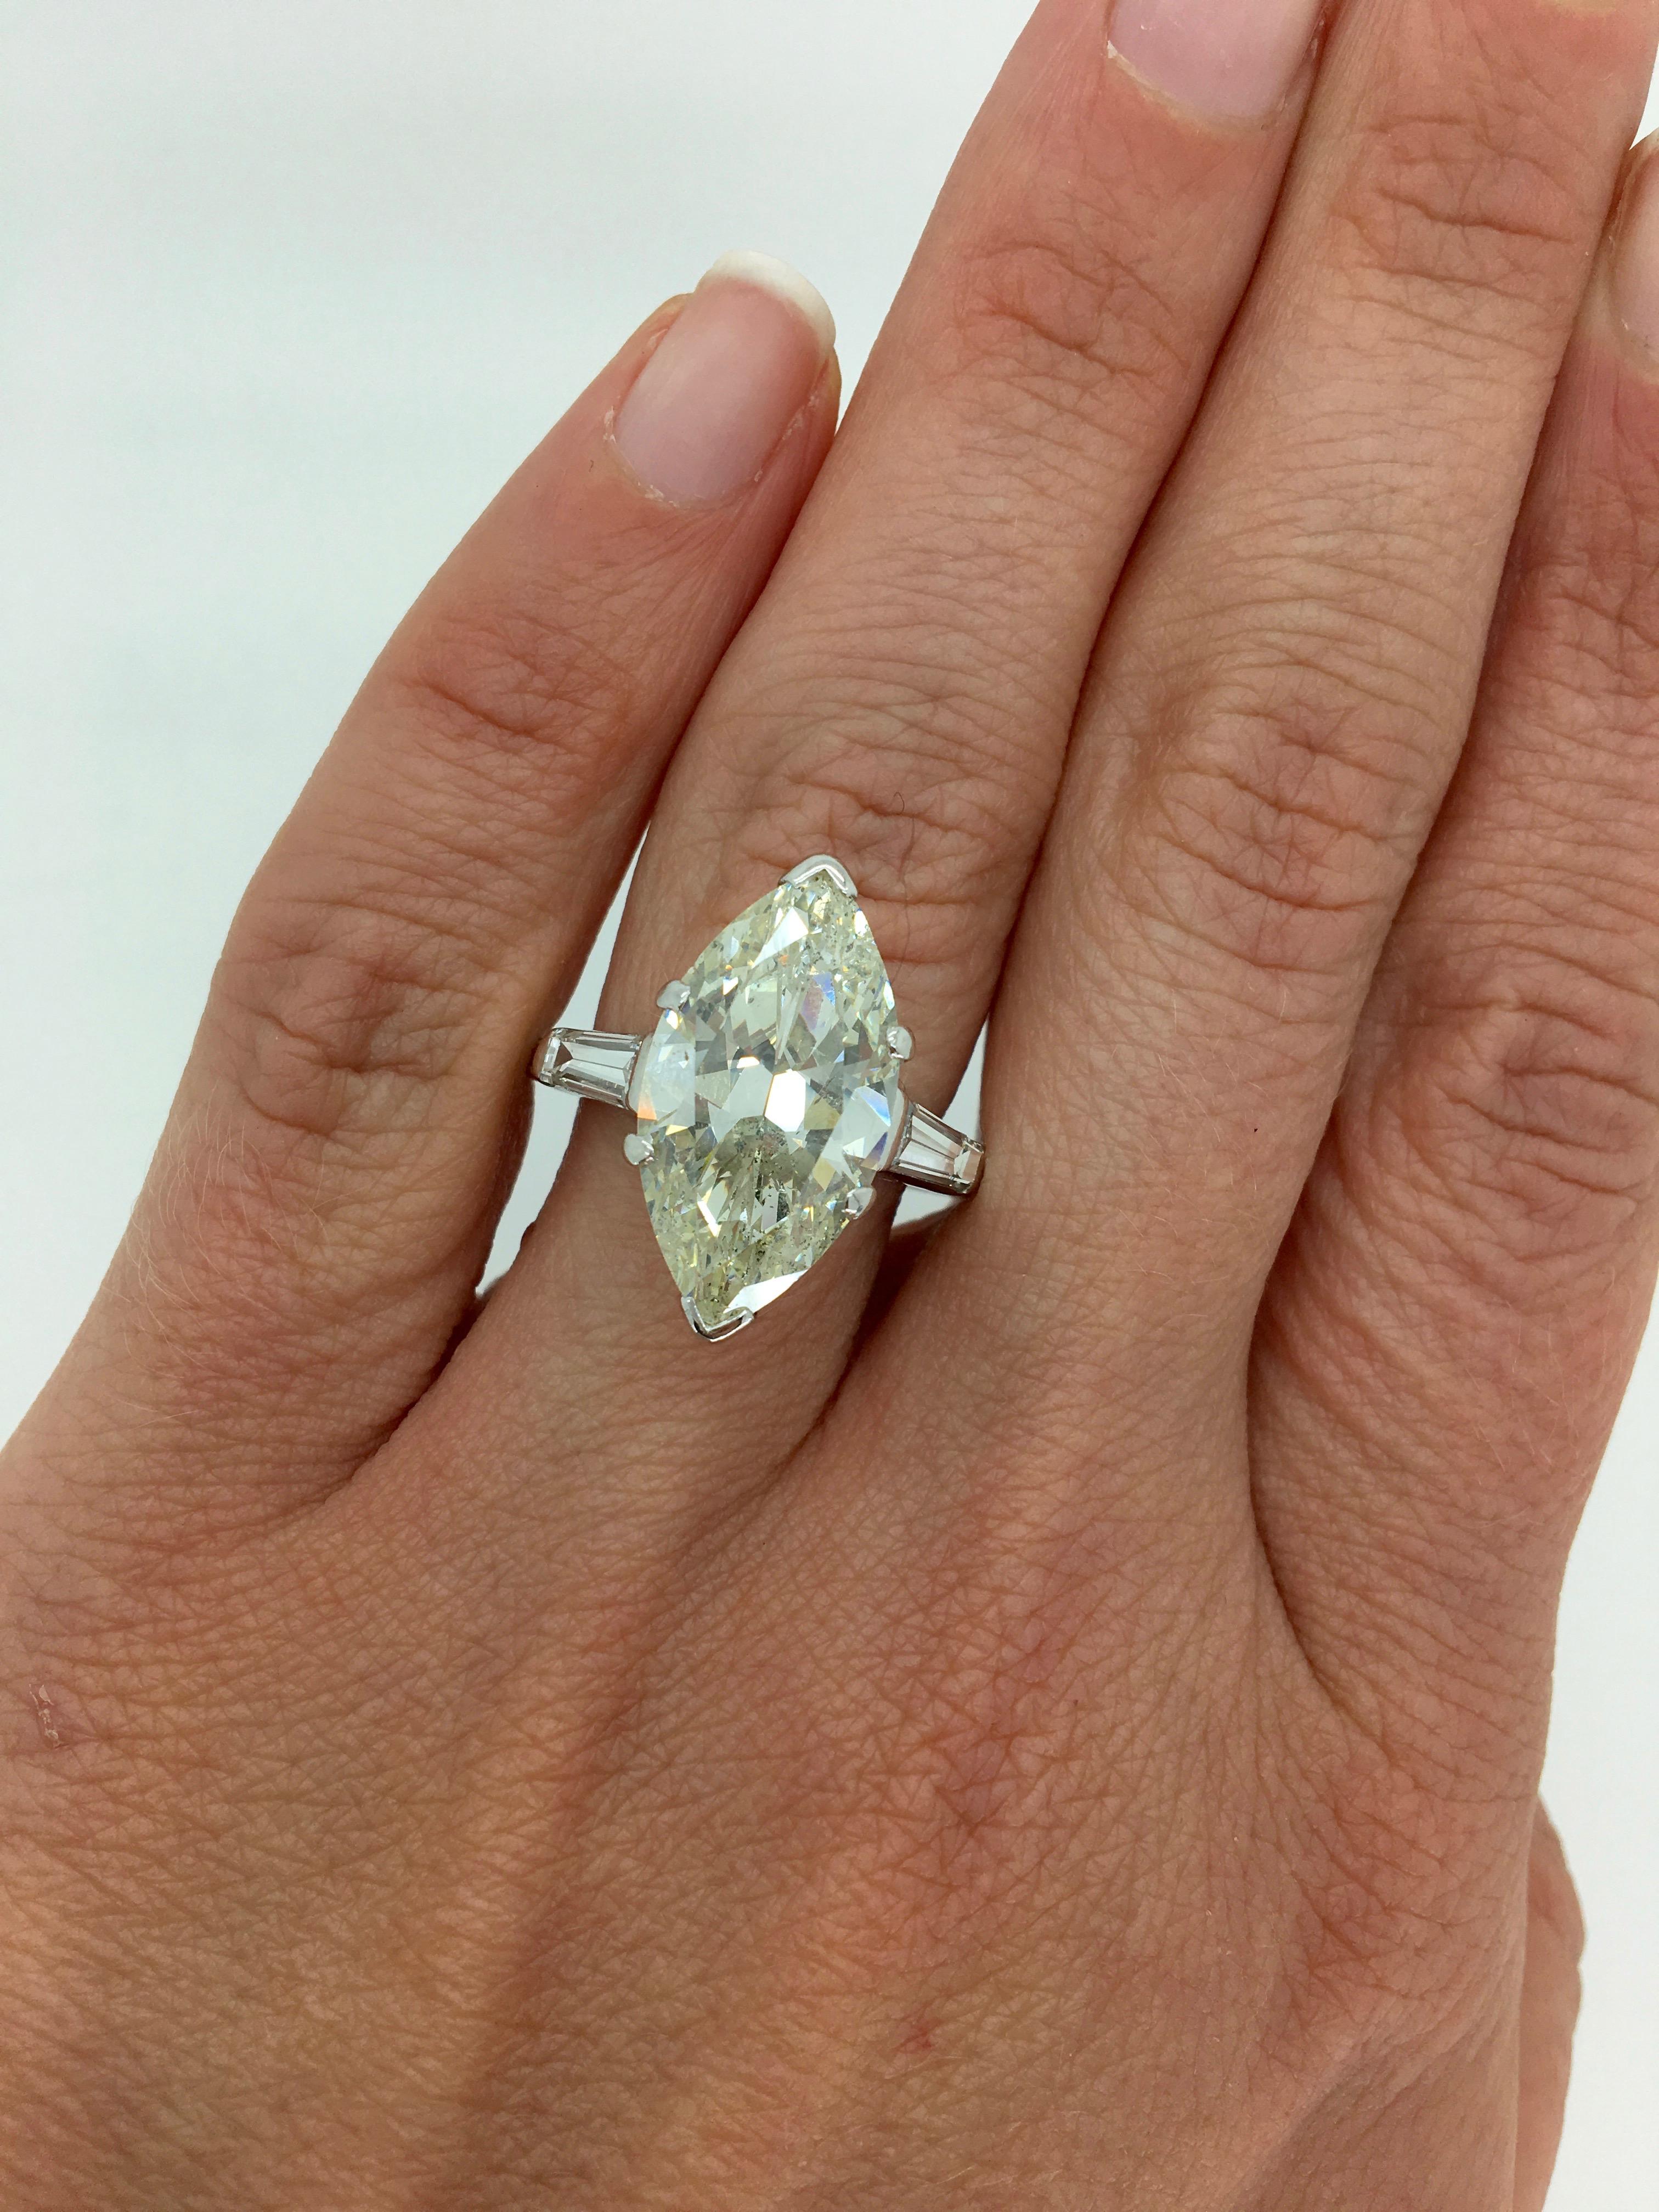 Absolutely Stunning 7.10CT Marquise Cut Diamond Ring With Classic Flanking Tapered Baguette Cut Diamonds.

Center Diamond Carat Weight: Approximately 7.10CT
Center Diamond Cut: Marquise Cut
Center Diamond Color: N-O
Center Diamond Clarity:  I1
Total